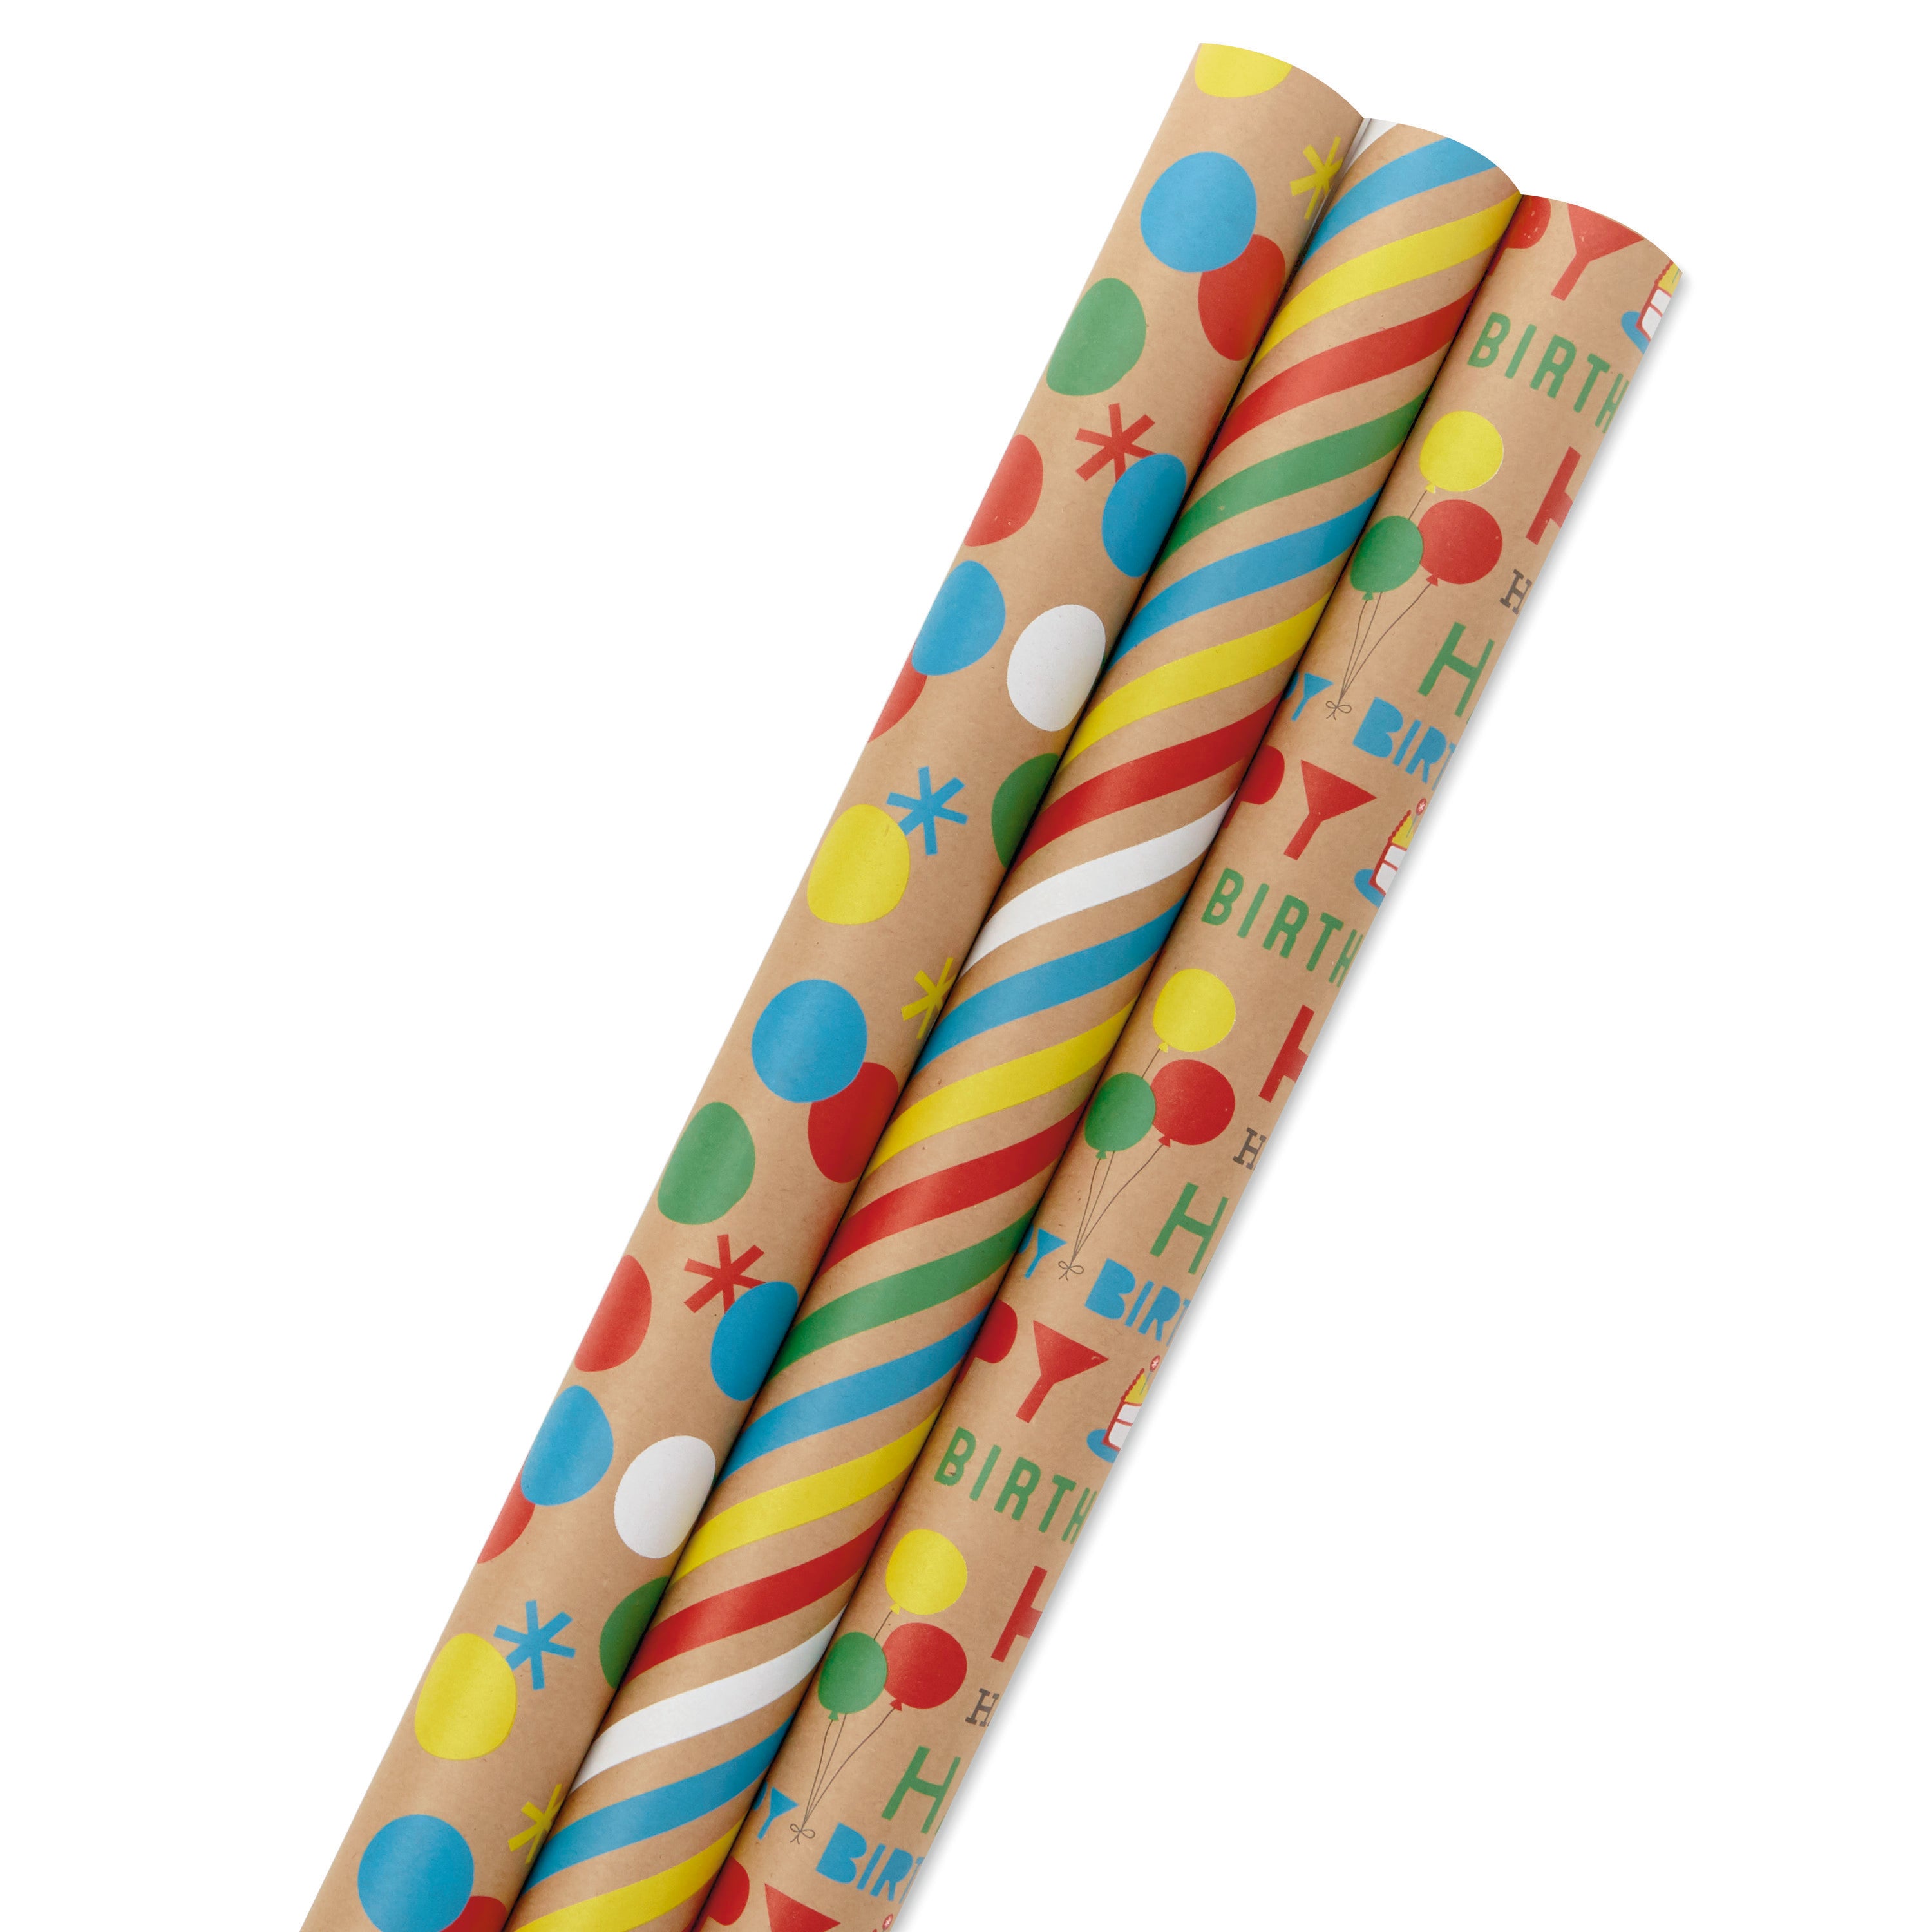 Hallmark All Occasion Kraft Wrapping Paper Bundle: Birthday, Stripes, Dots with Kraft on Reverse (3-Pack: 105 sq. ft. ttl.) for Valentines Day, Kids Parties, Crafts, DIY Decorations and More